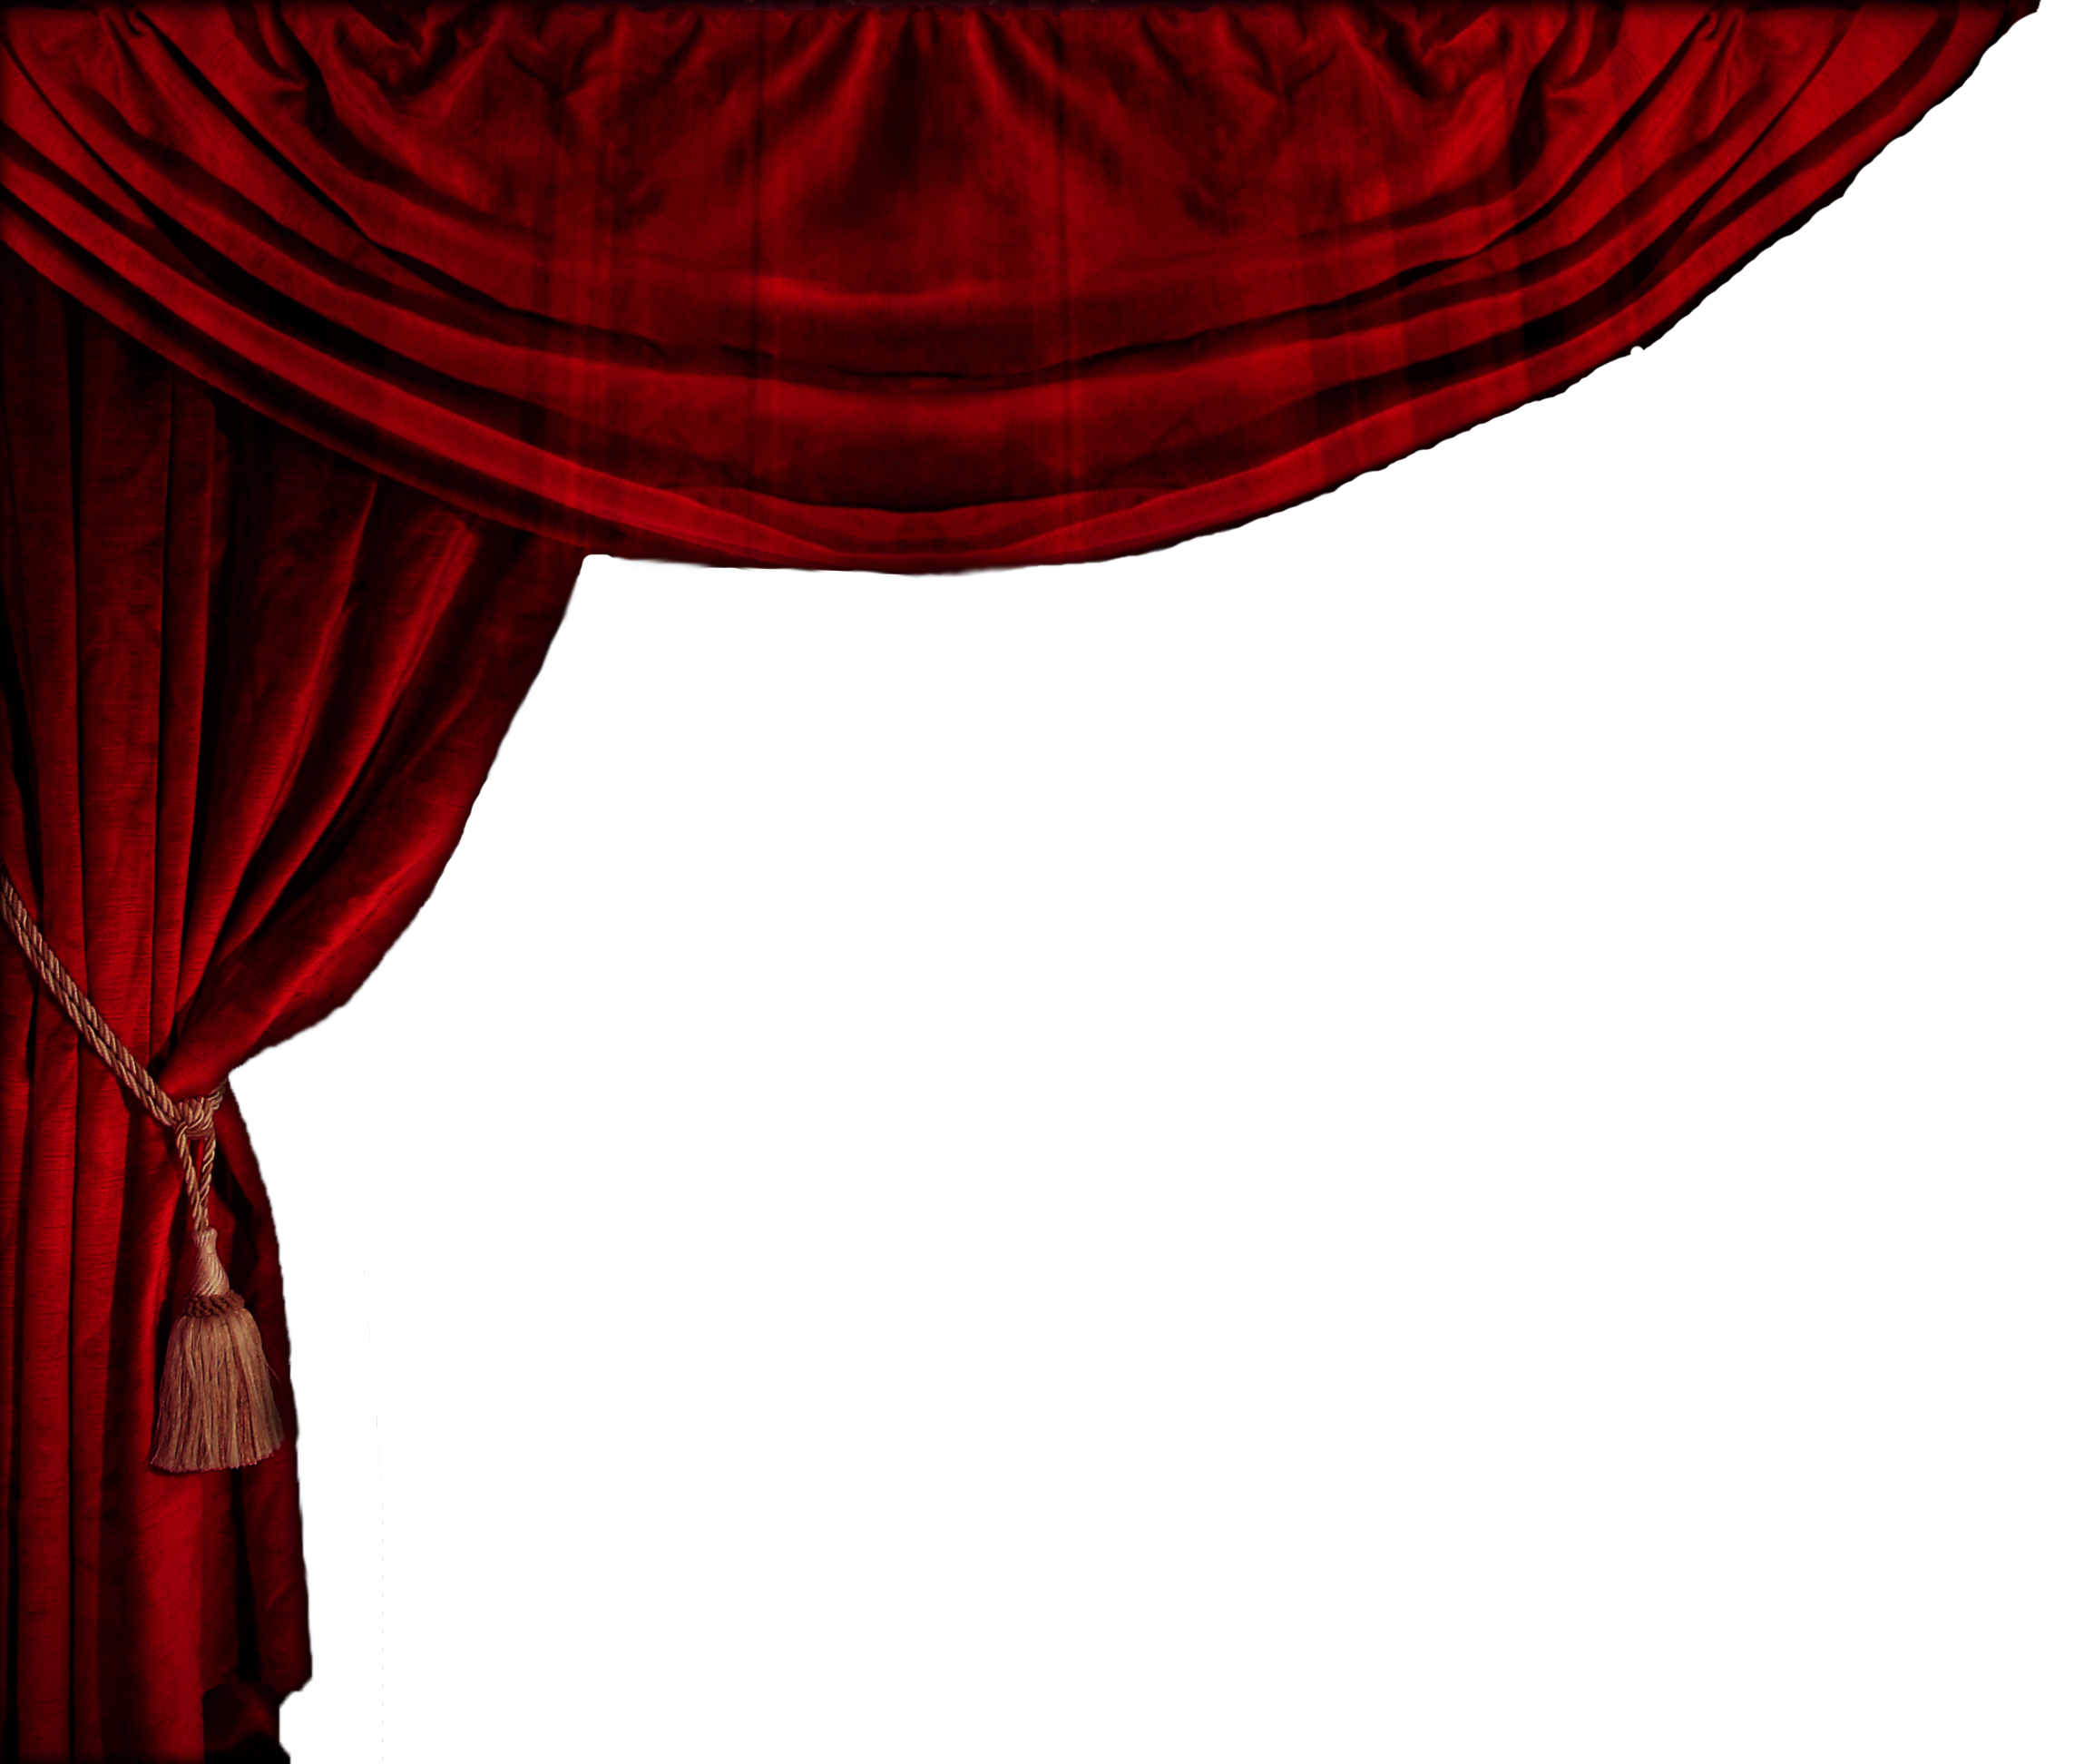 curtain clipart opera stage